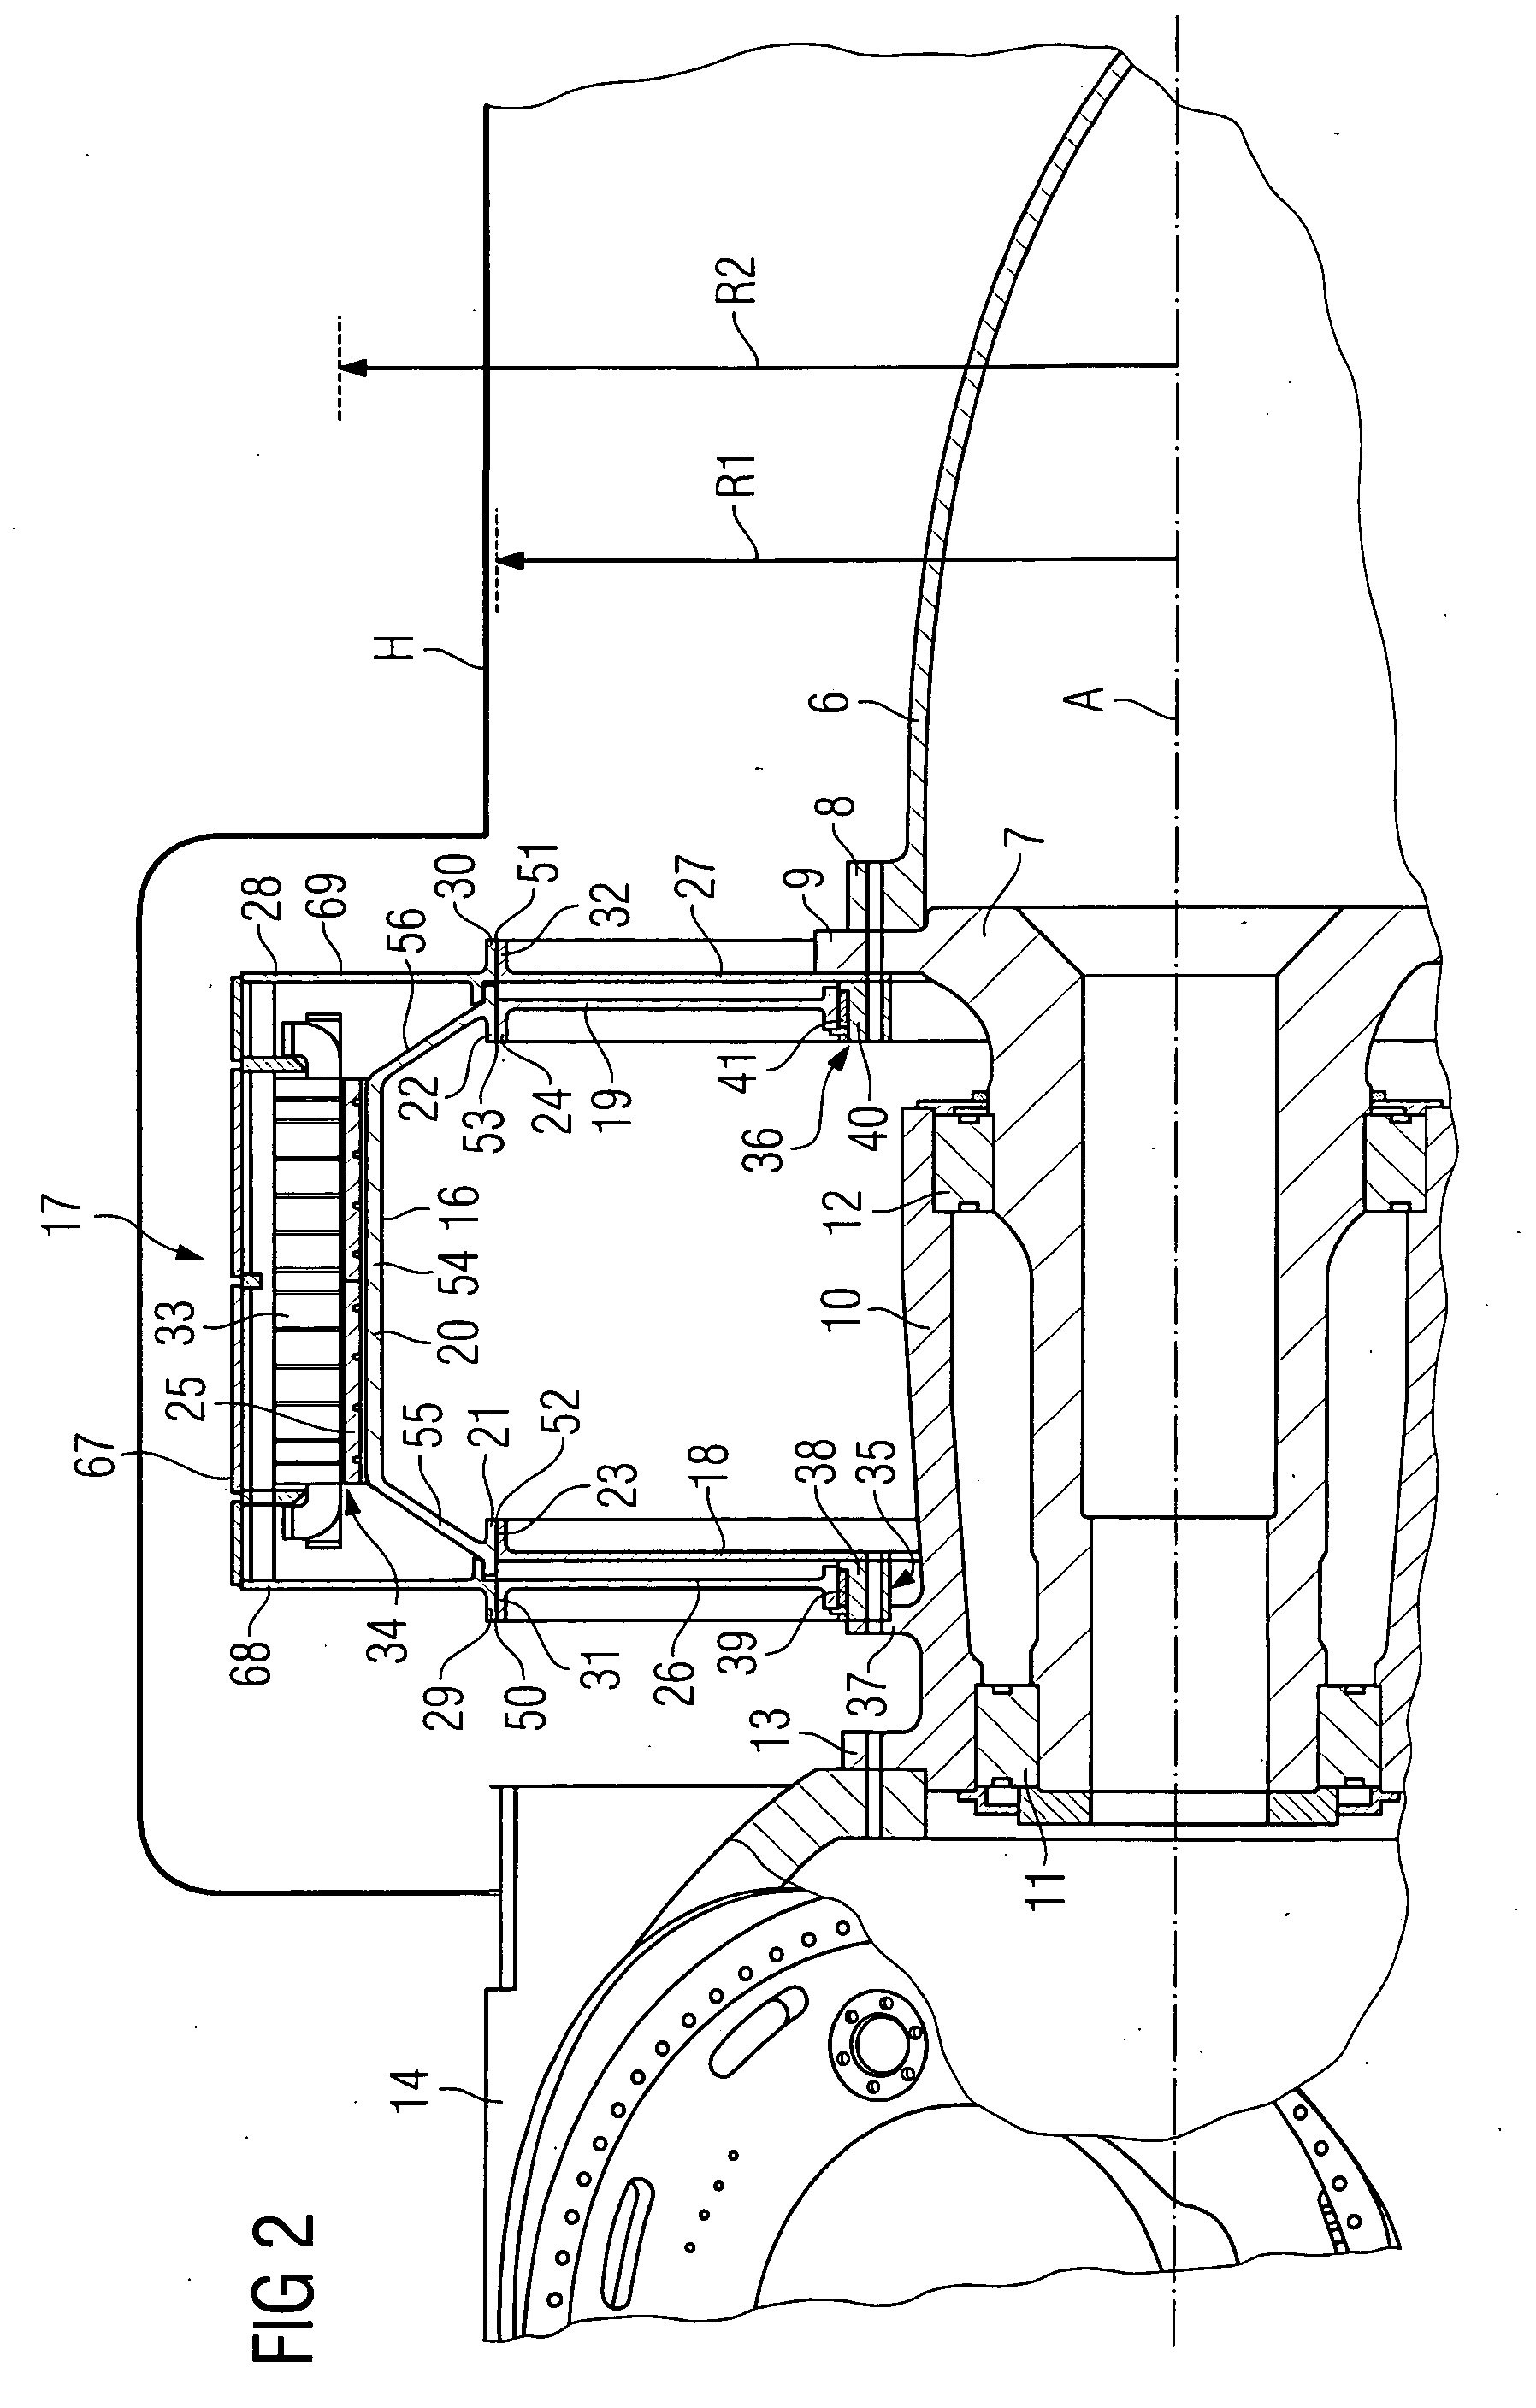 Arrangement for a direct drive generator for a wind turbine and method for the assembly of the generator